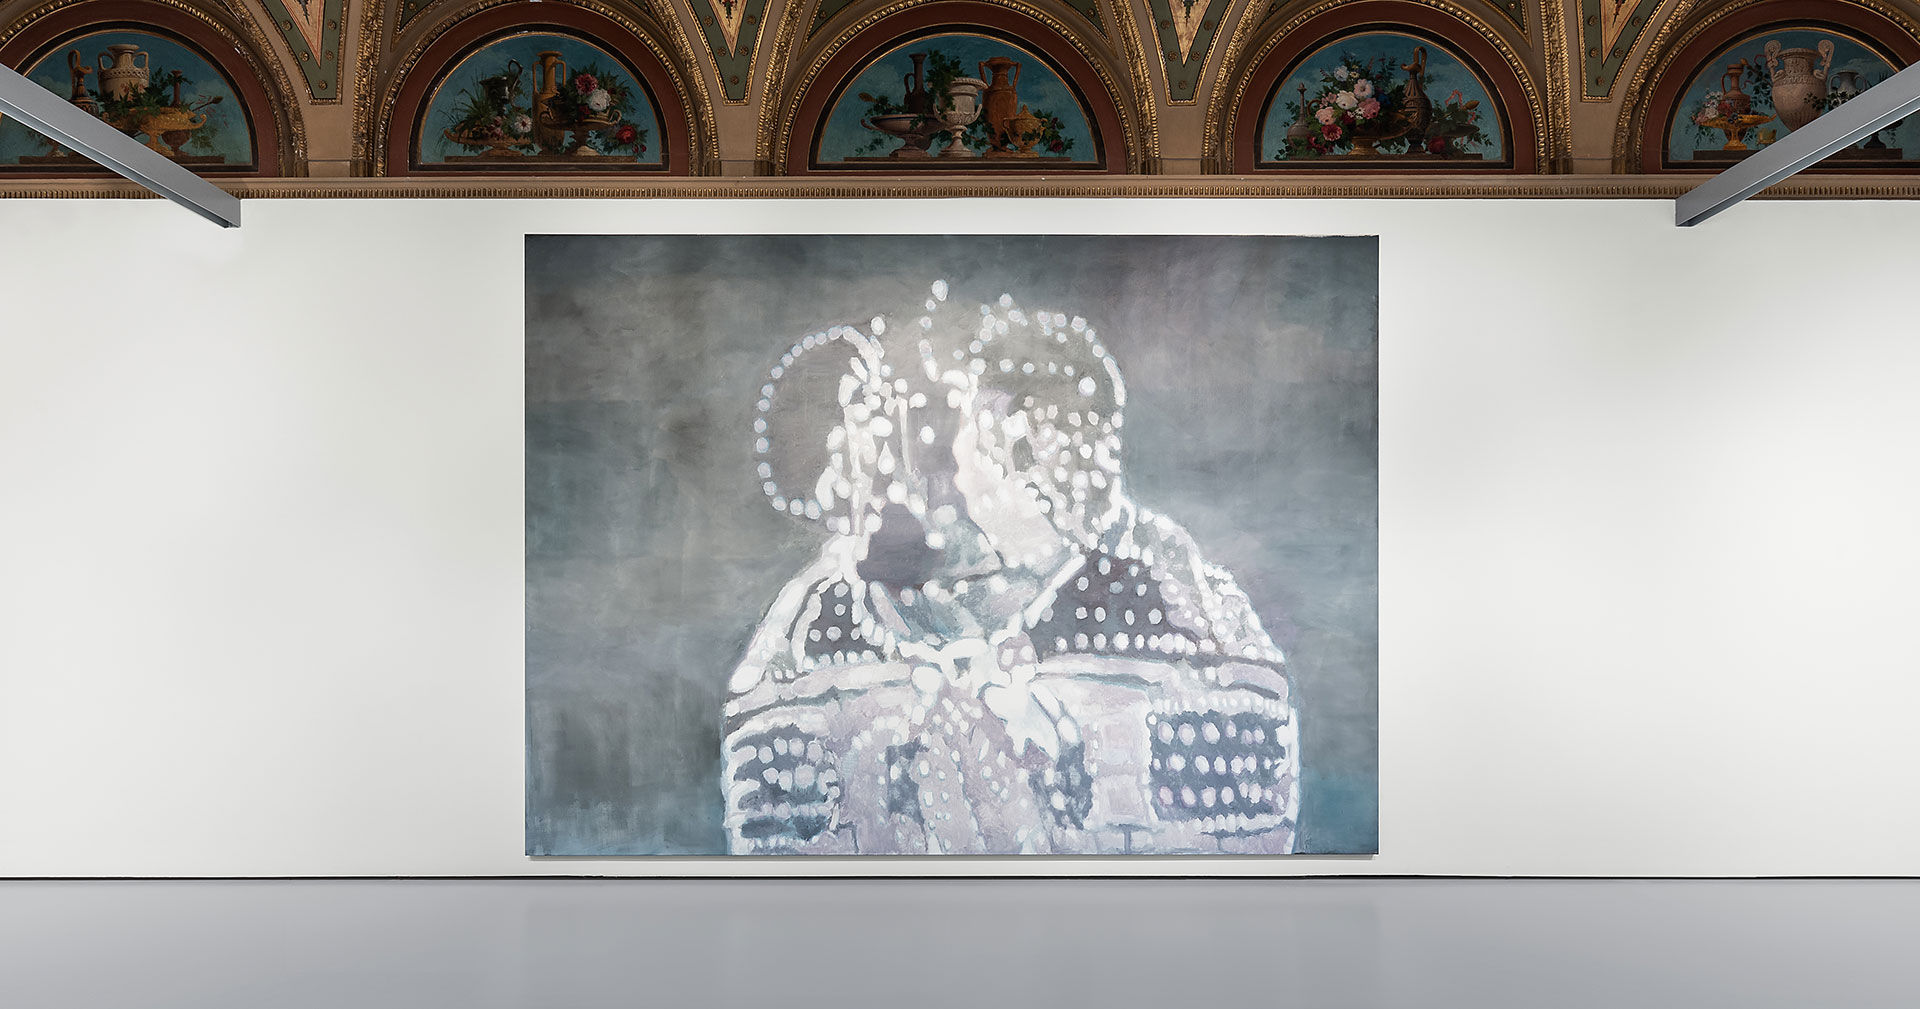 Installation view of the exhibition Luc Tuymans: La Pelle at Installation view, Luc Tuymans: La Pelle at Palazzo Grassi in Venice, 2019.